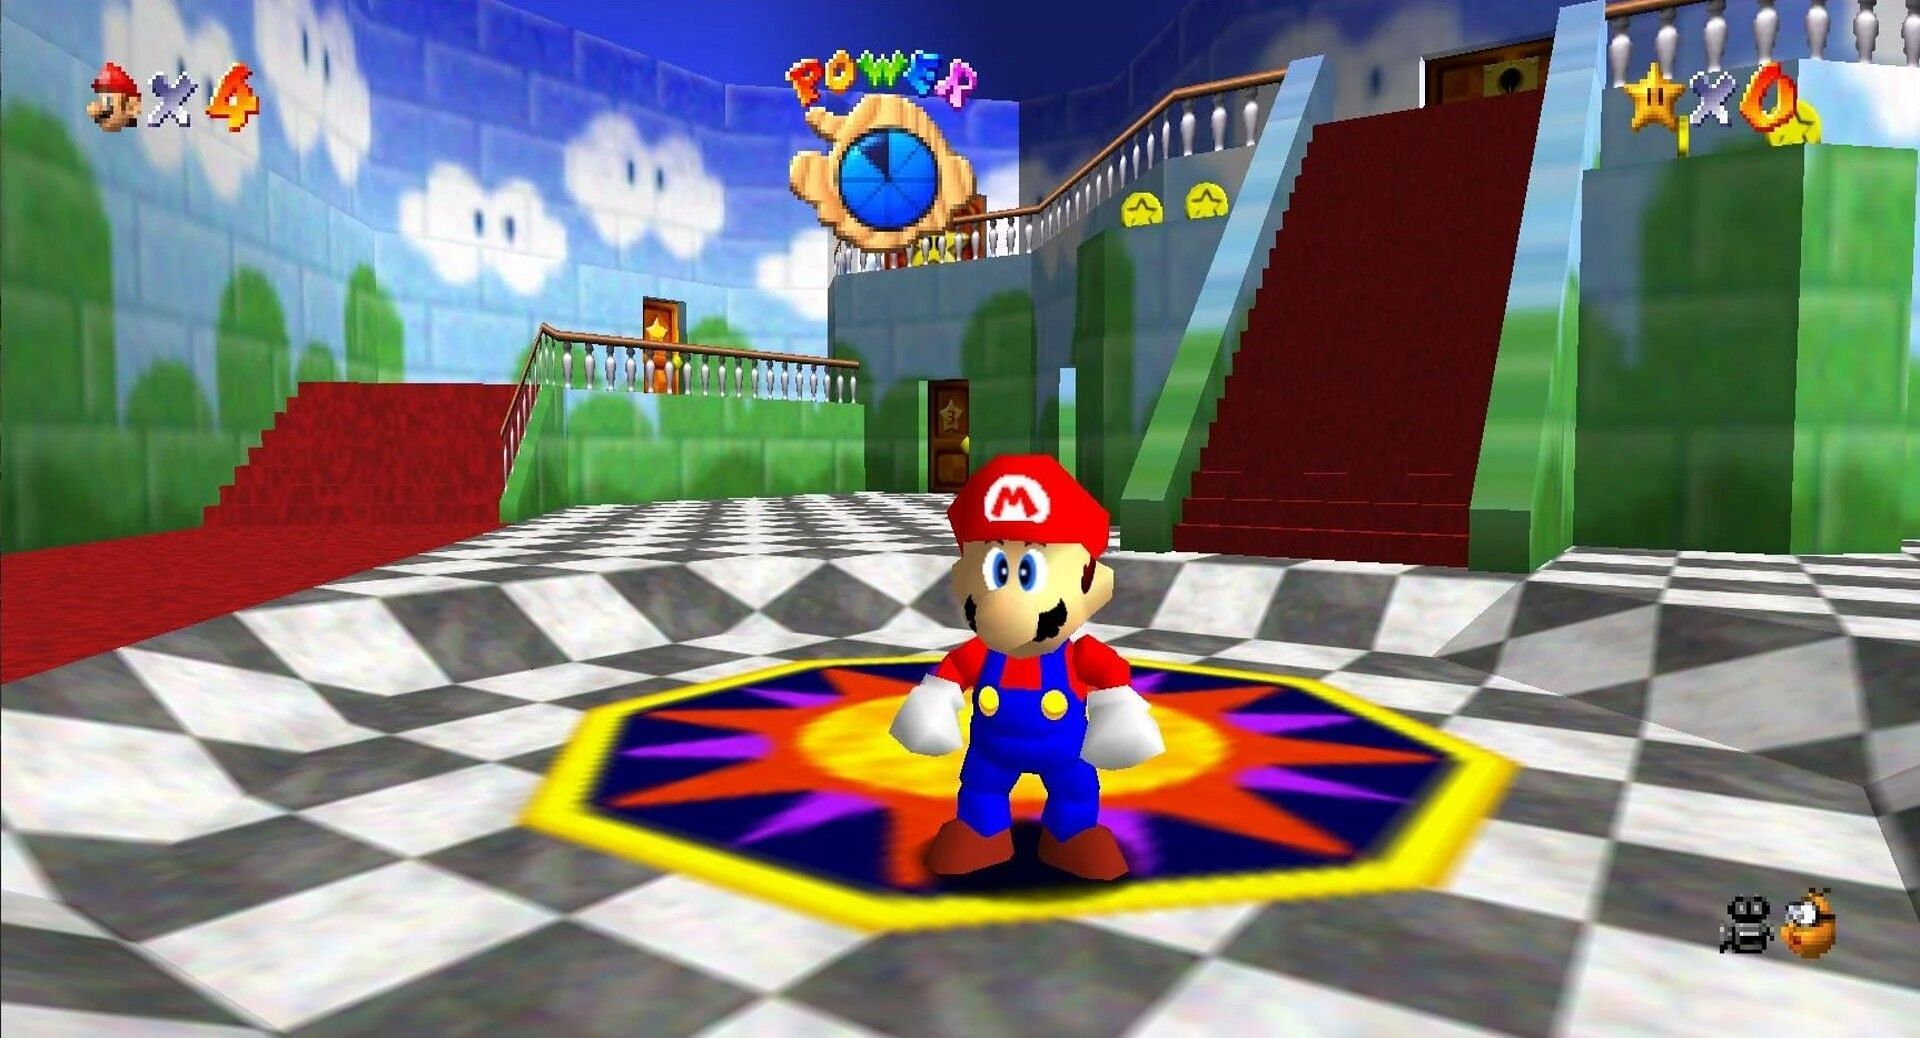 3D games garnered a lot of attention after the release of Super Mario 64 (Image via Nintendo)